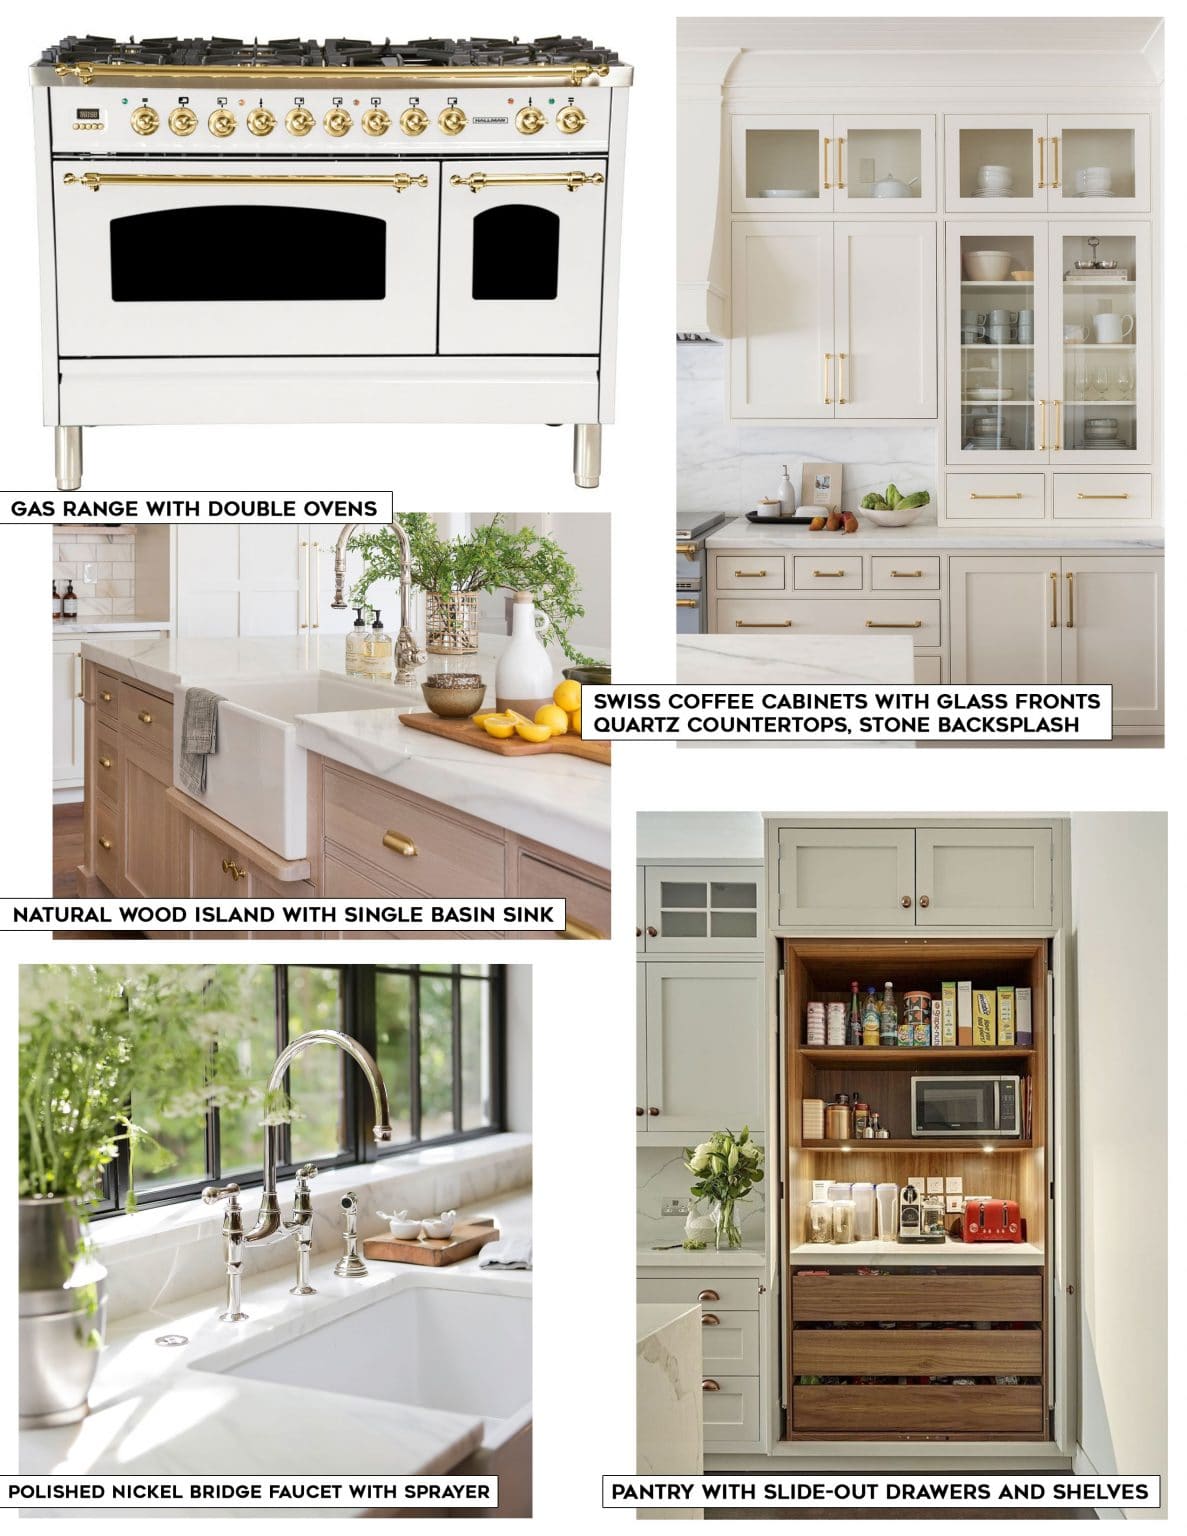 Kitchen Renovation: Our Biggest Project Yet! Kitchen remodel plans